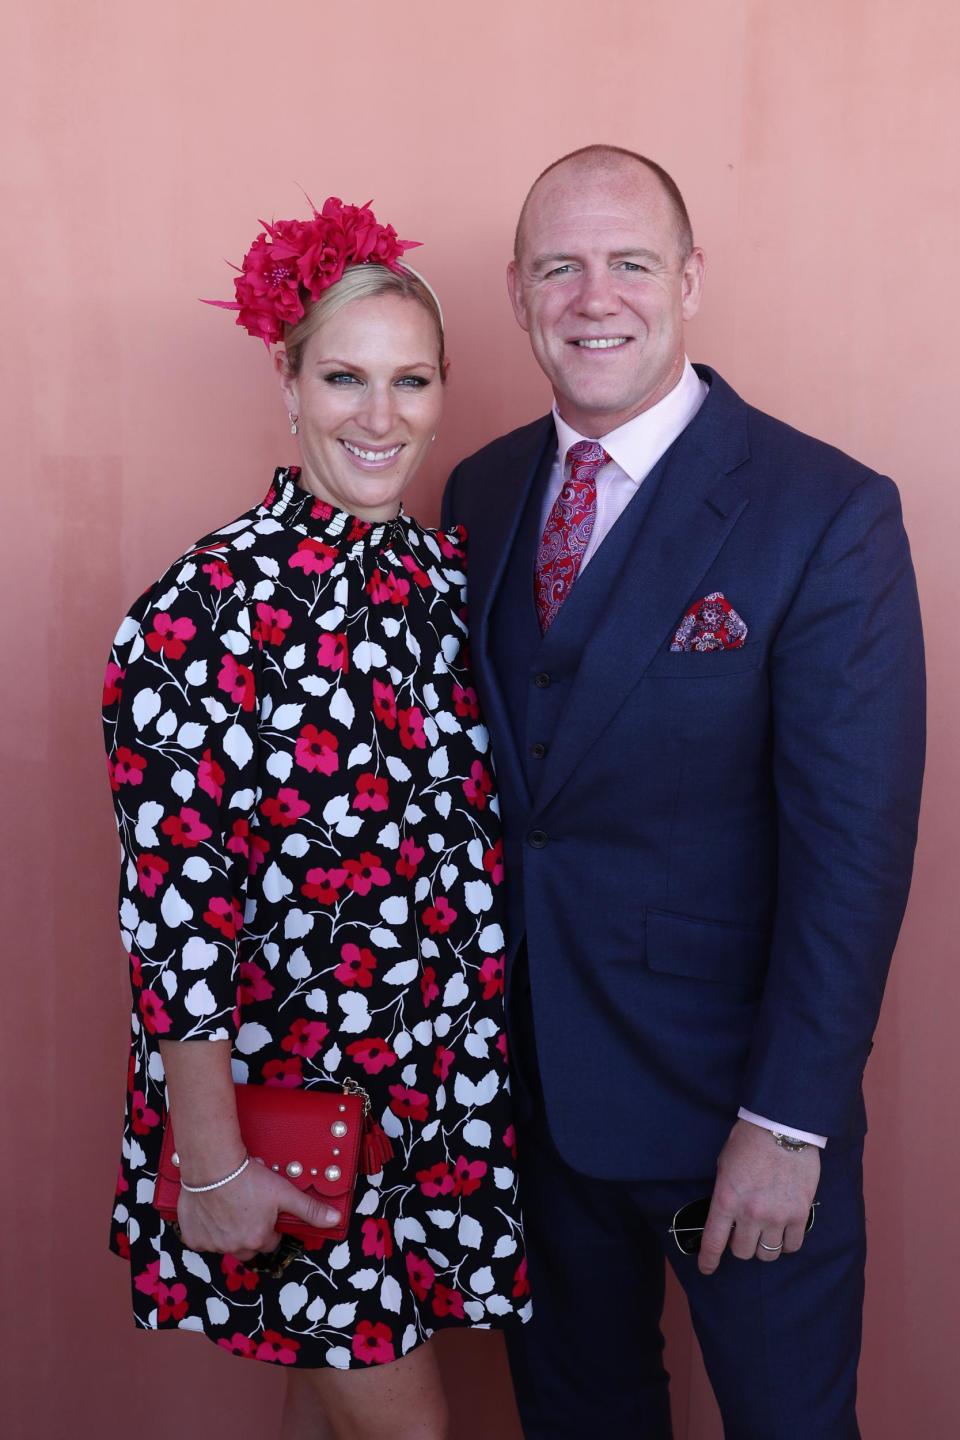 Zara Tindall with her husband Mike (Getty Images)